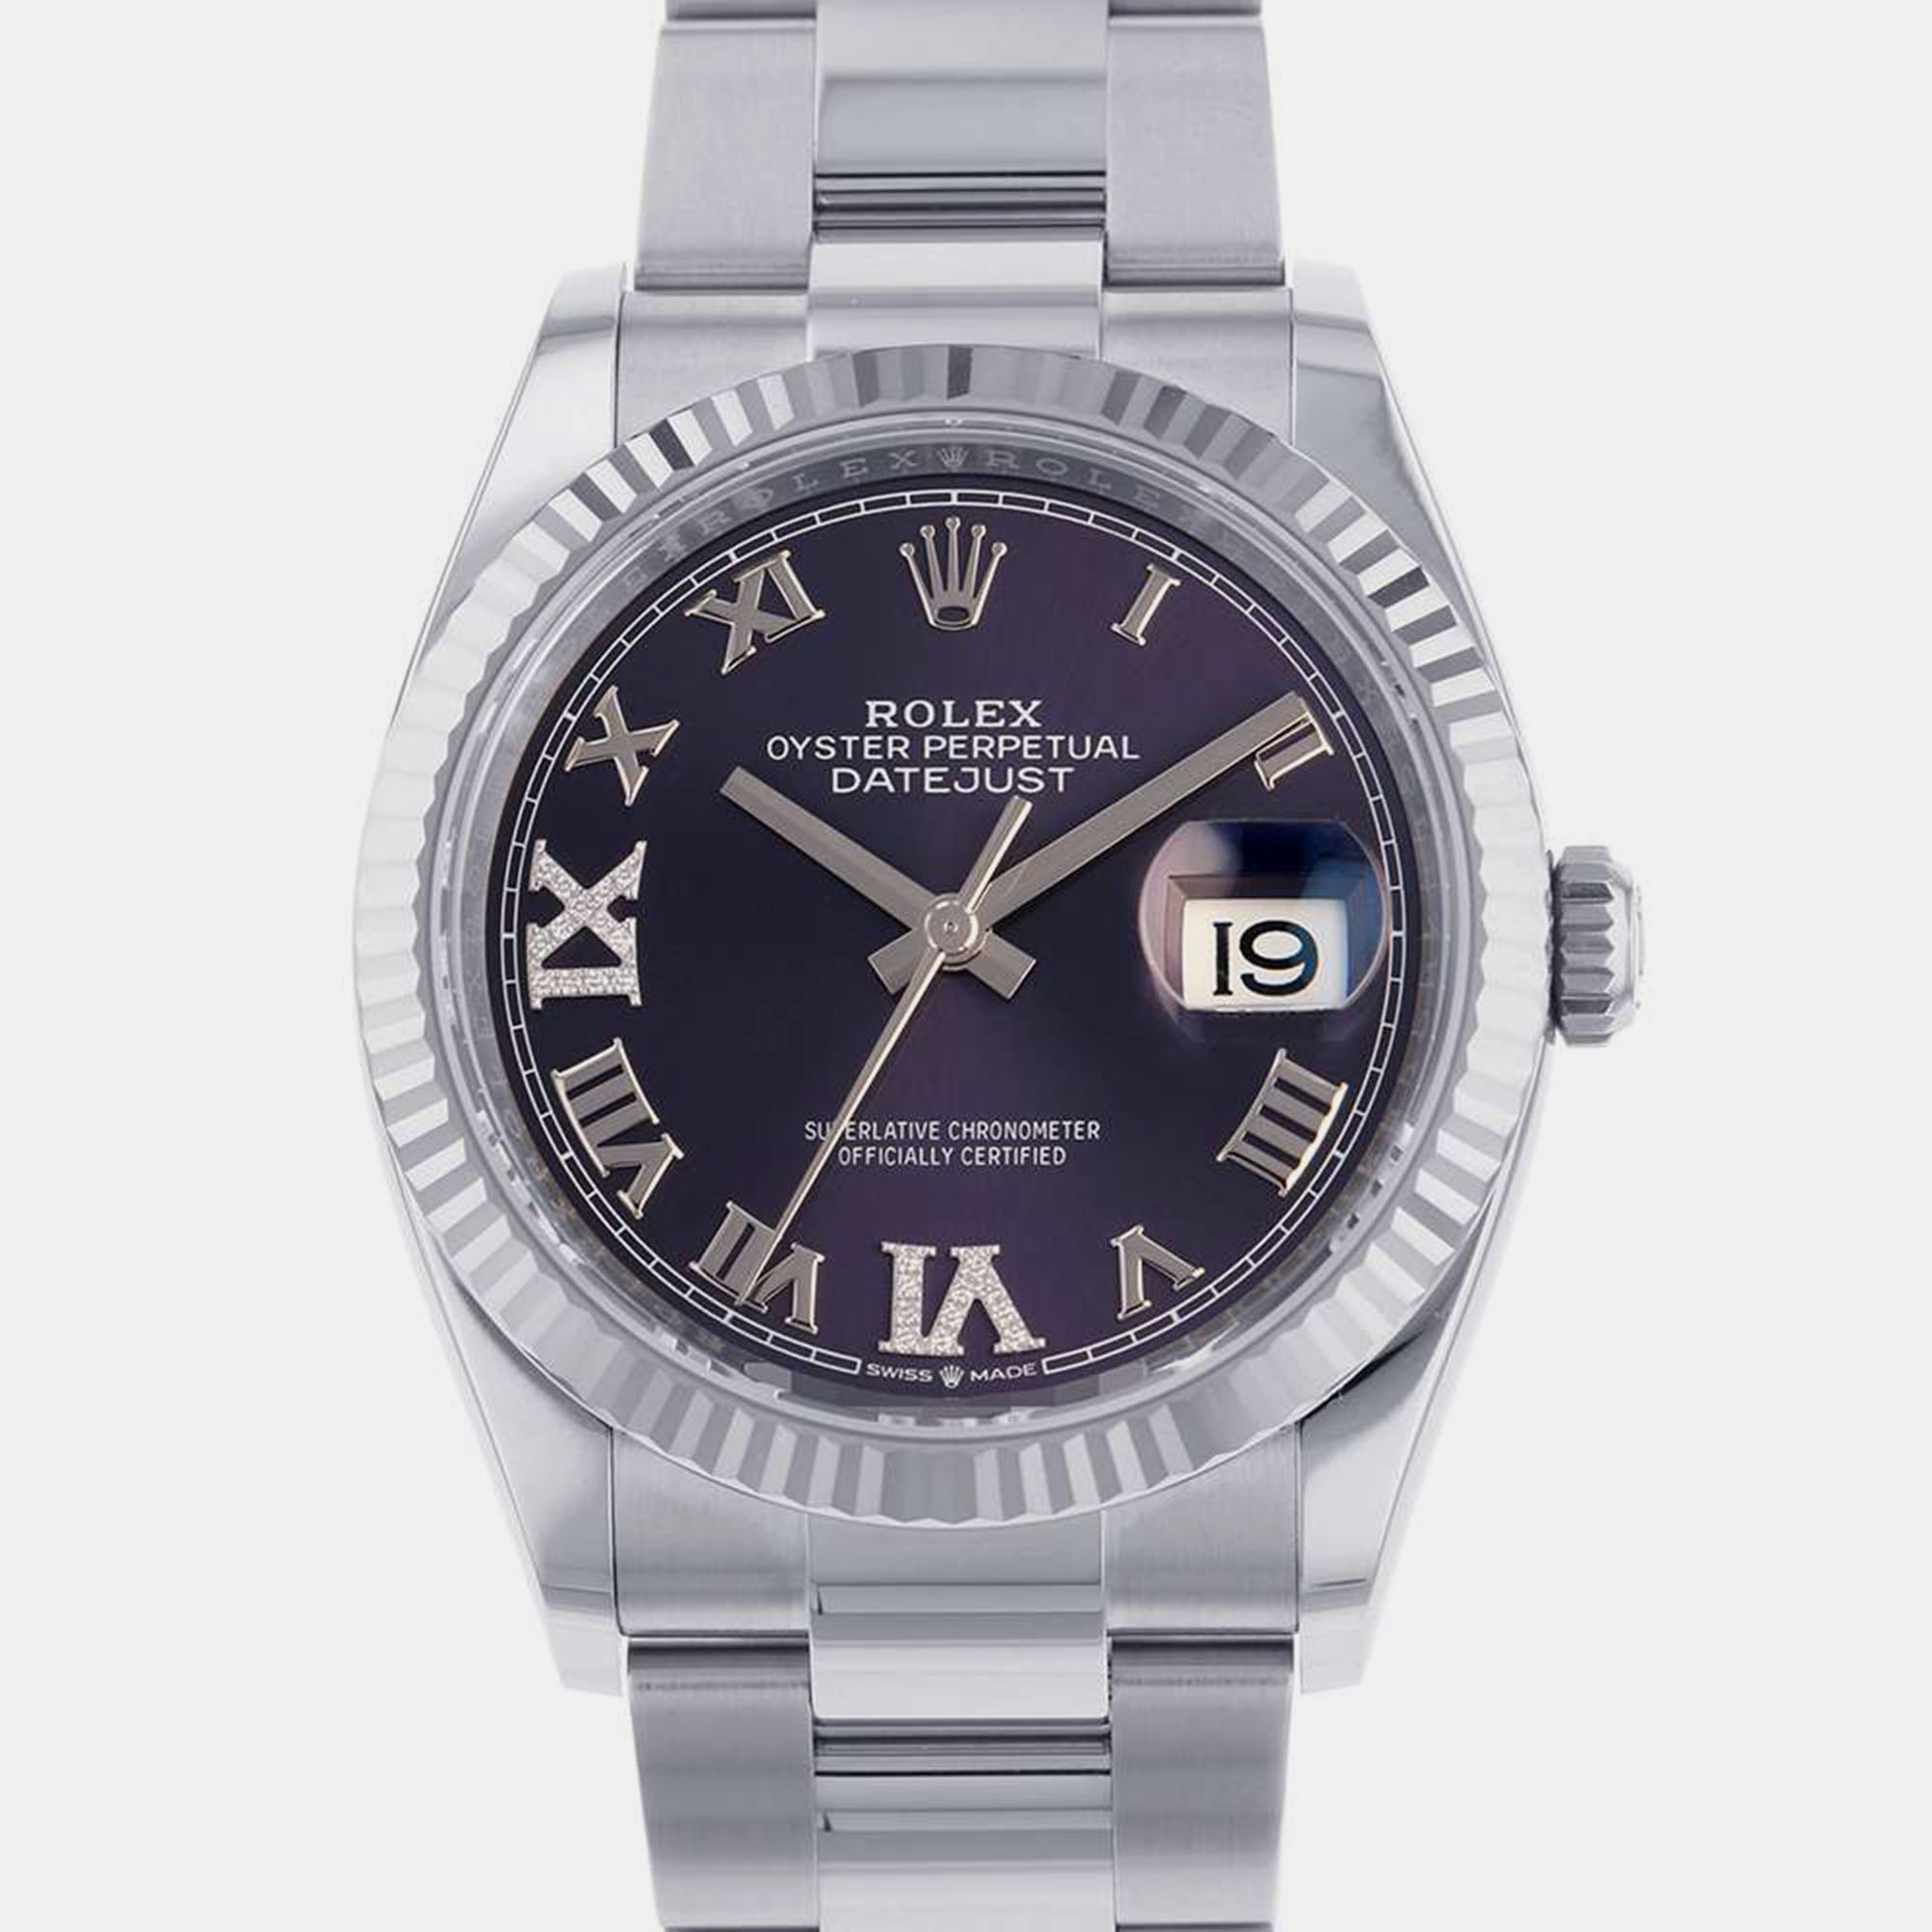 Rolex Navy Blue 18k White Gold And Stainless Steel Datejust 126234 Automatic Men's Wristwatch 36 Mm